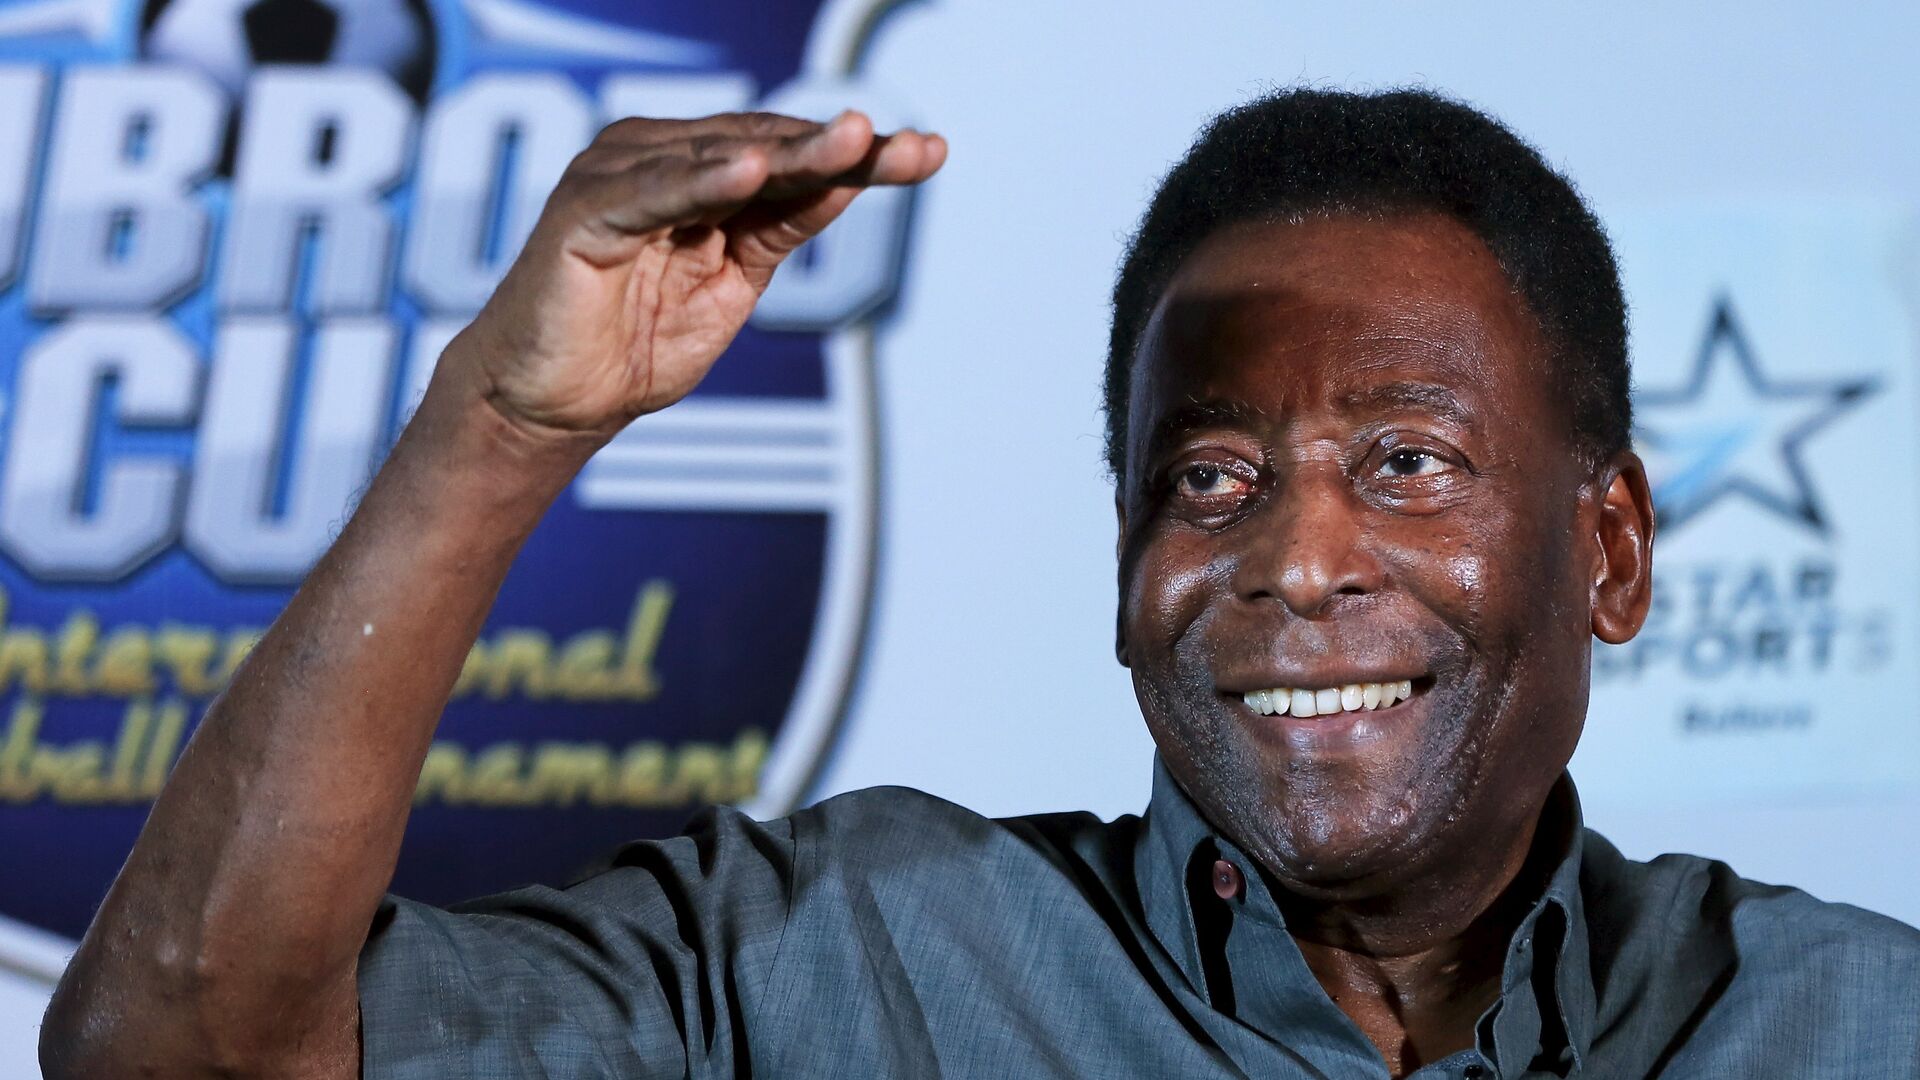 Legendary Brazilian soccer player Pele gestures during a news conference in Gurgaon on the outskirts of New Delhi, India, October 15, 2015 - اسپوتنیک افغانستان  , 1920, 19.09.2021